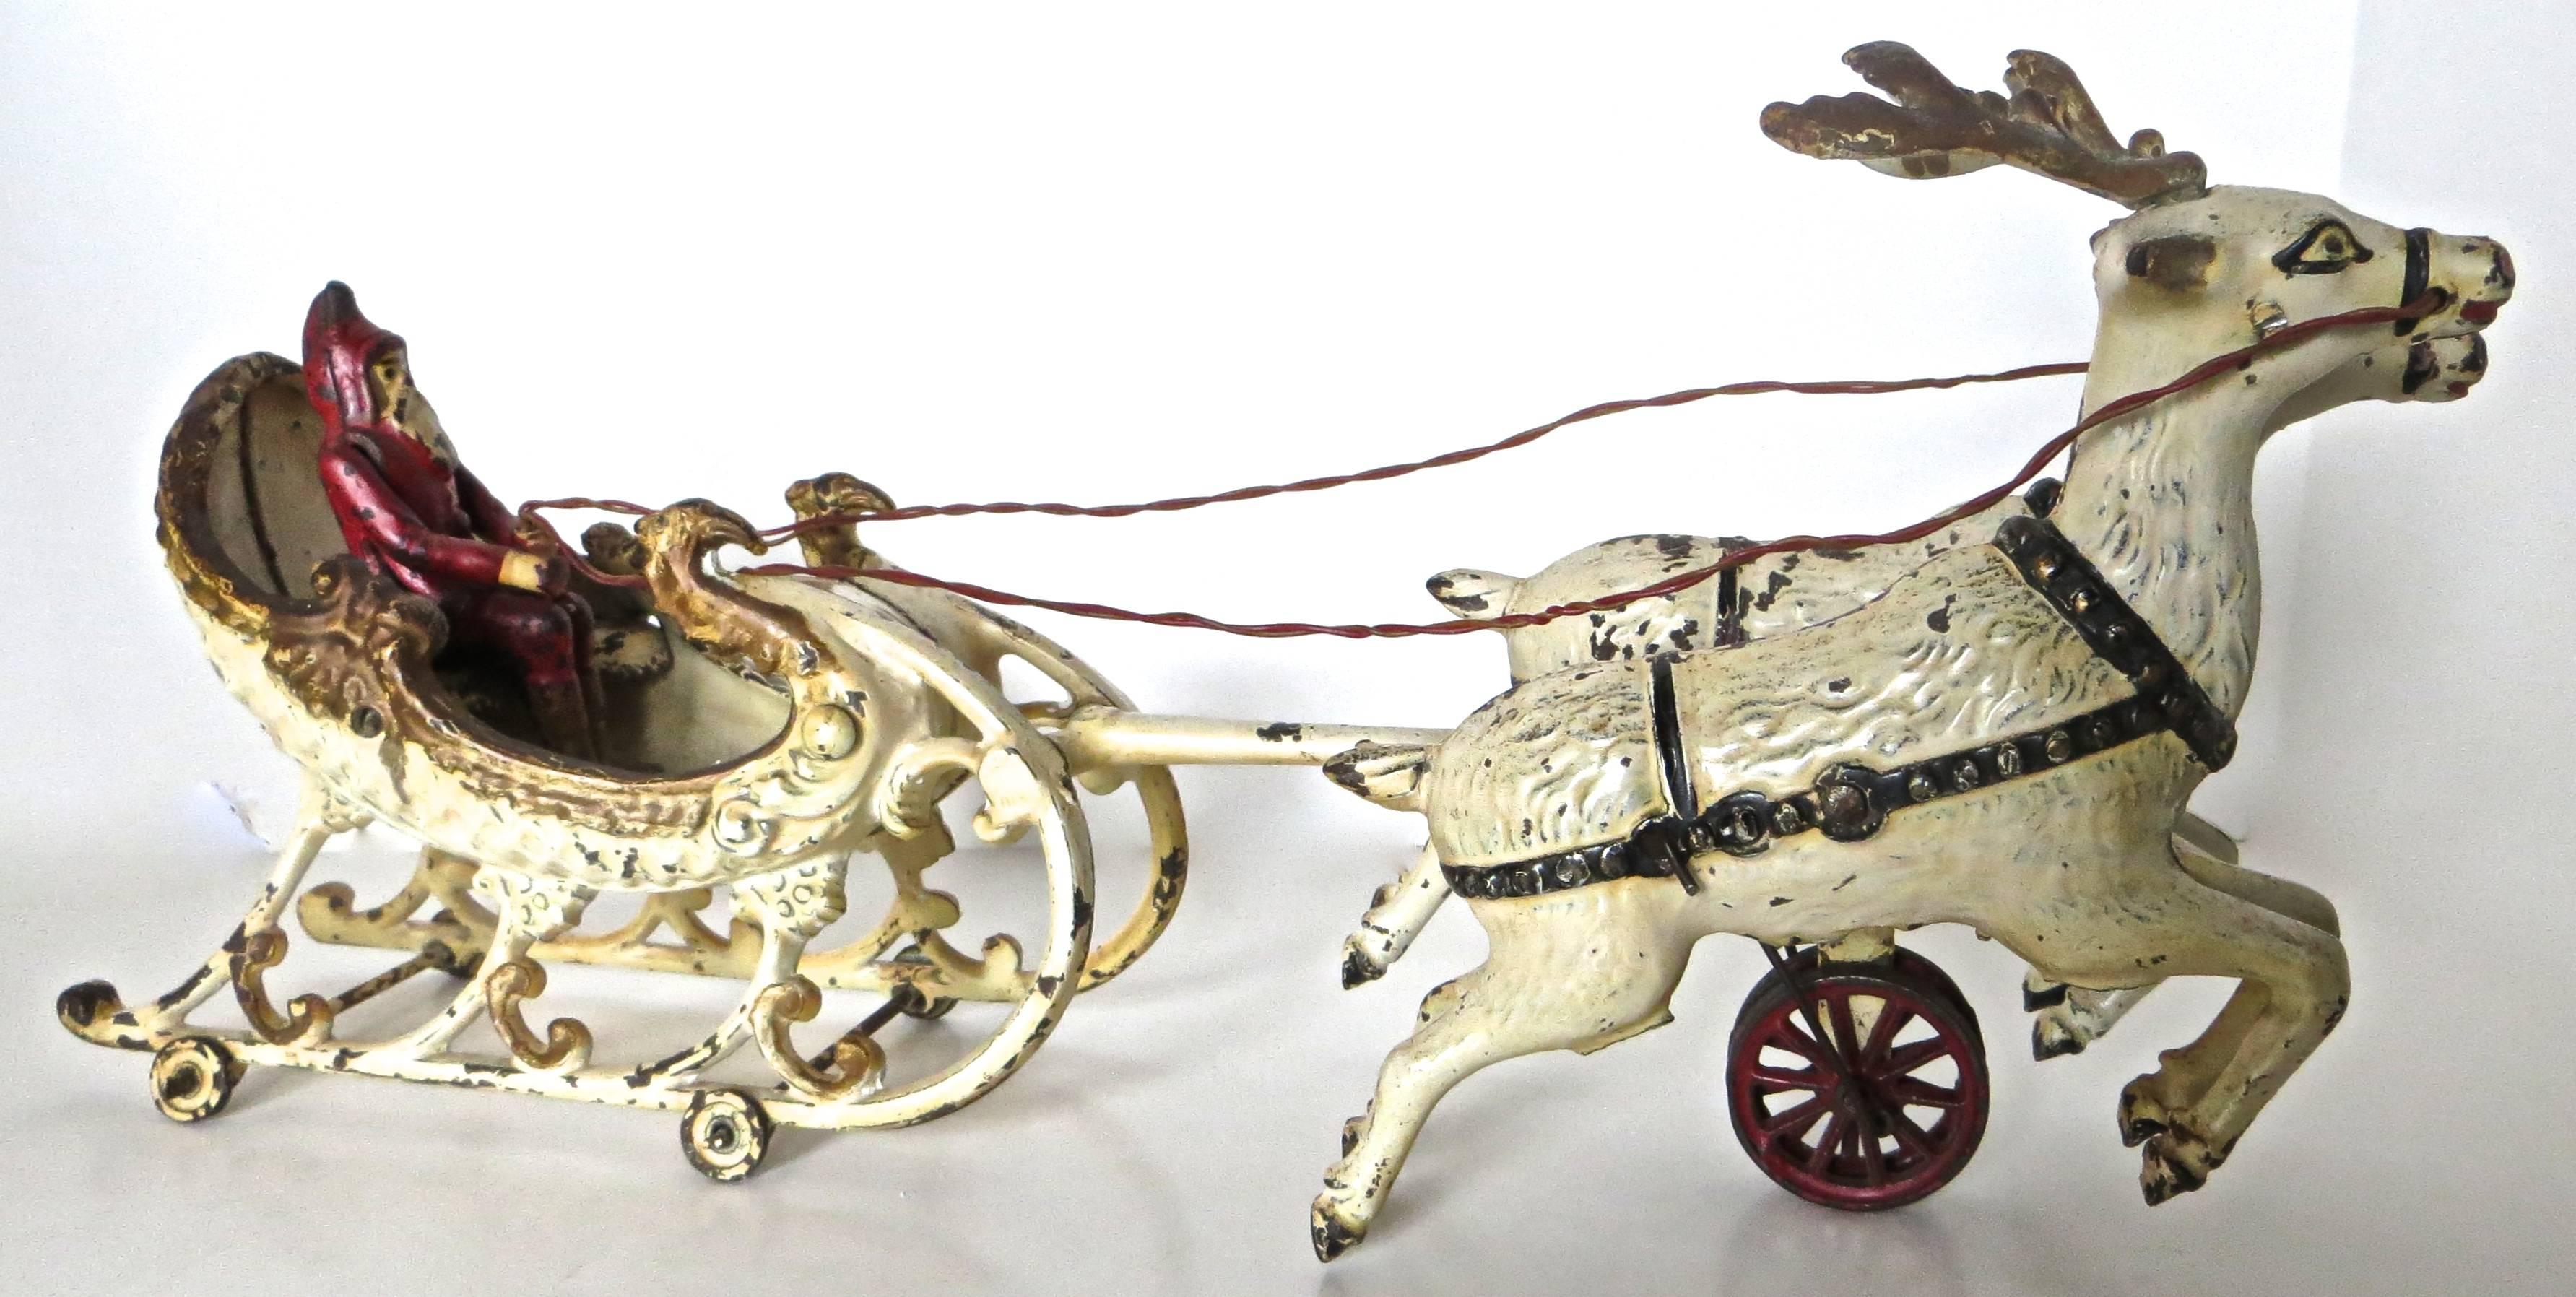 This is a very difficult to find cast iron Christmas toy made just after the turn of the century by the Hubley Manufacturing Company, Lancaster, Pennsylvania, featuring Santa Claus in a sleigh being pulled by two reindeer. It is is the double